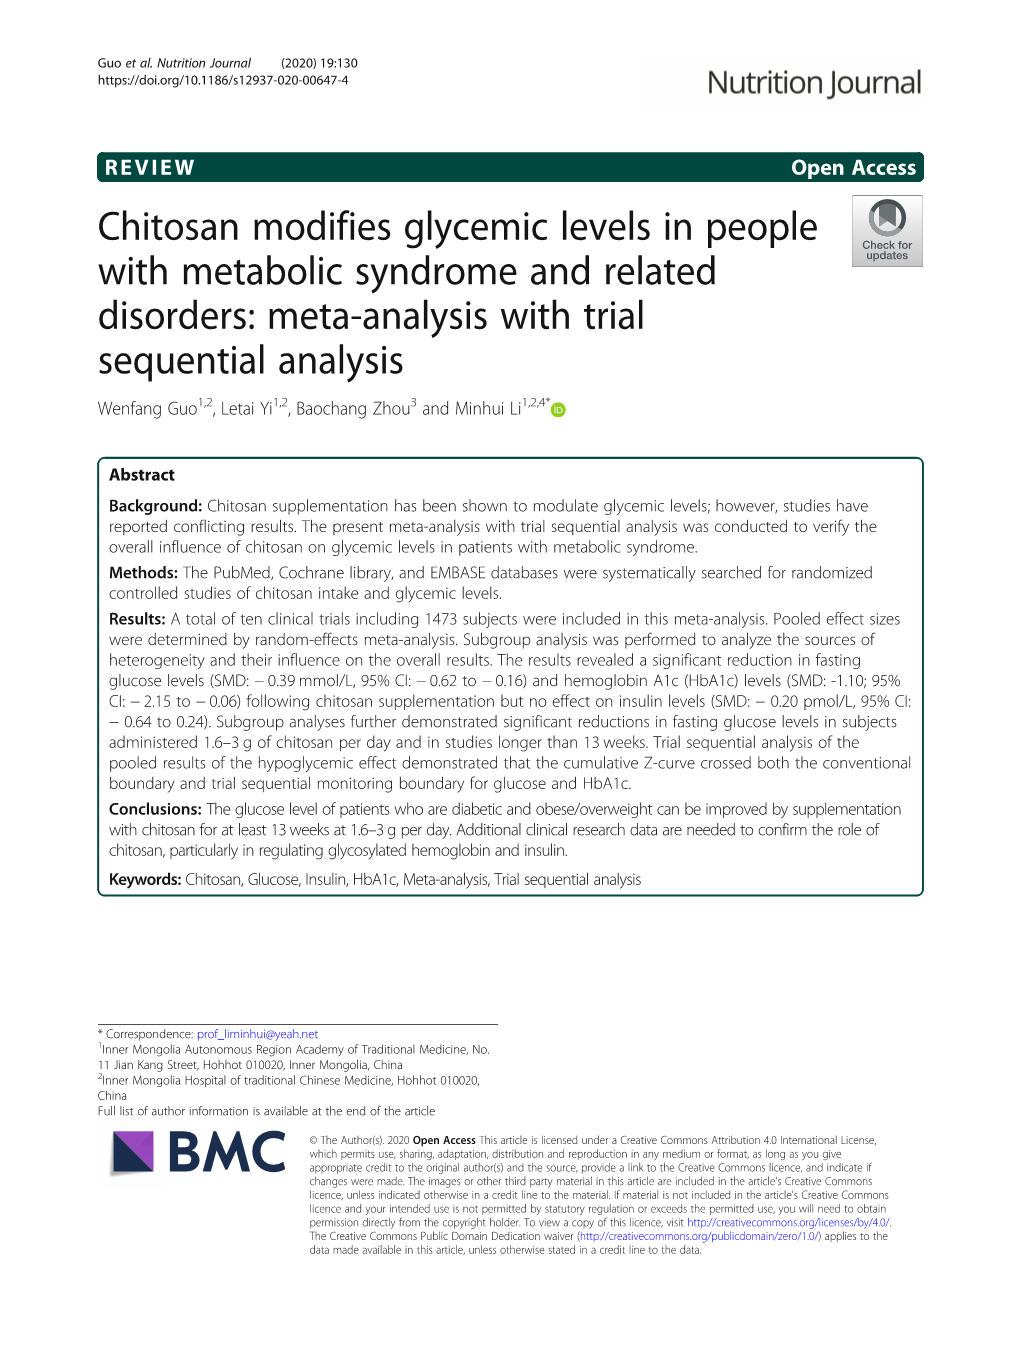 Chitosan Modifies Glycemic Levels in People with Metabolic Syndrome